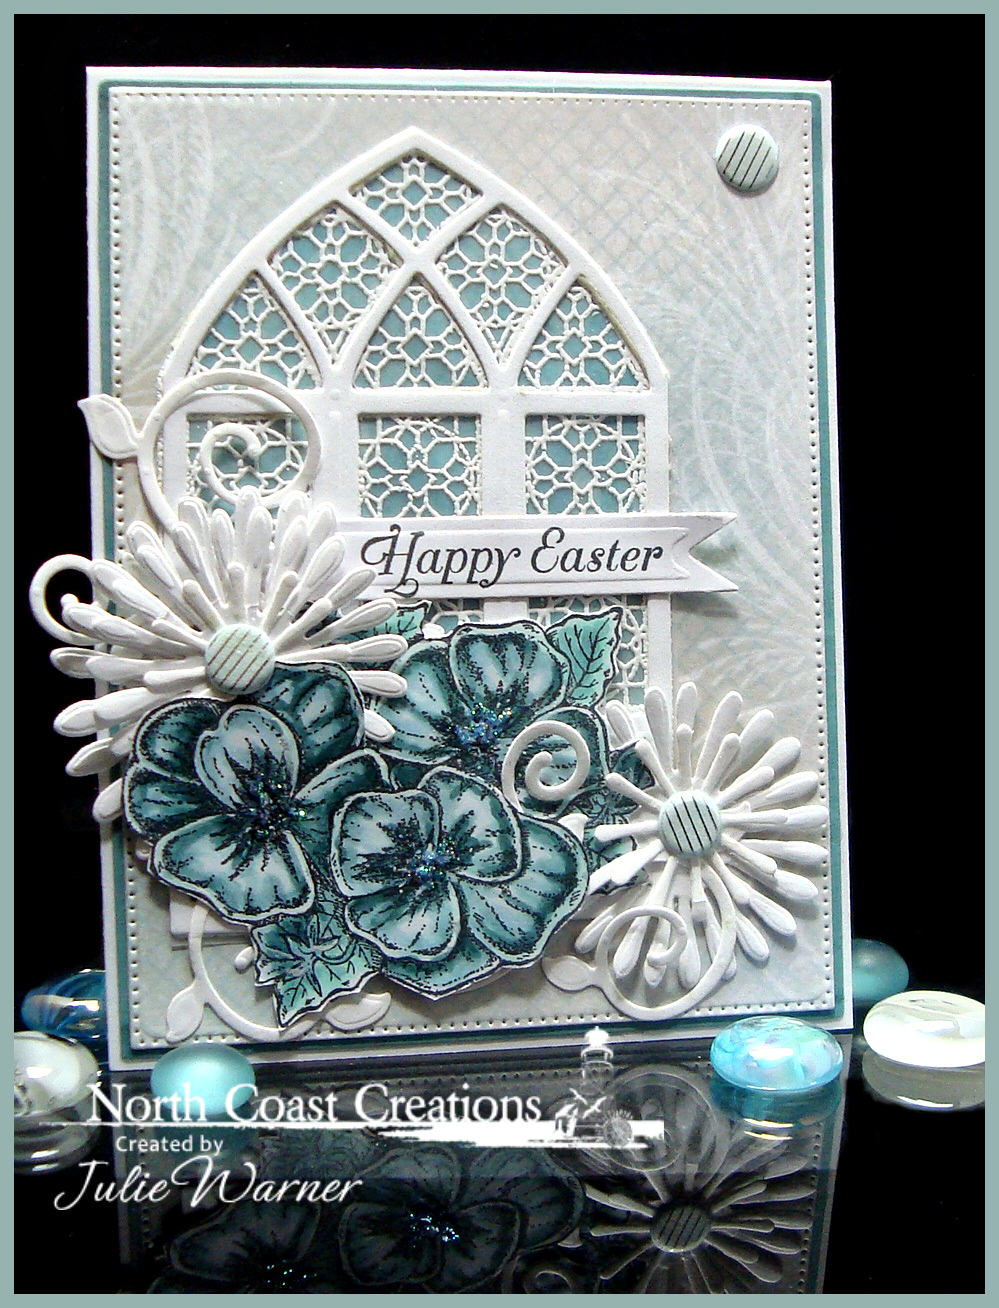 Stamps - North Coast Creations Pansies, ODBD Custom Flourished Star Pattern Die, ODBD Custom Cathedral Window Die, ODBD Cusotm Asters and Leaves Dies, ODBD Custom Fancy Foliage Die, ODBD Cathedral Window Marble, ODBD Shabby Rose Paper Collection